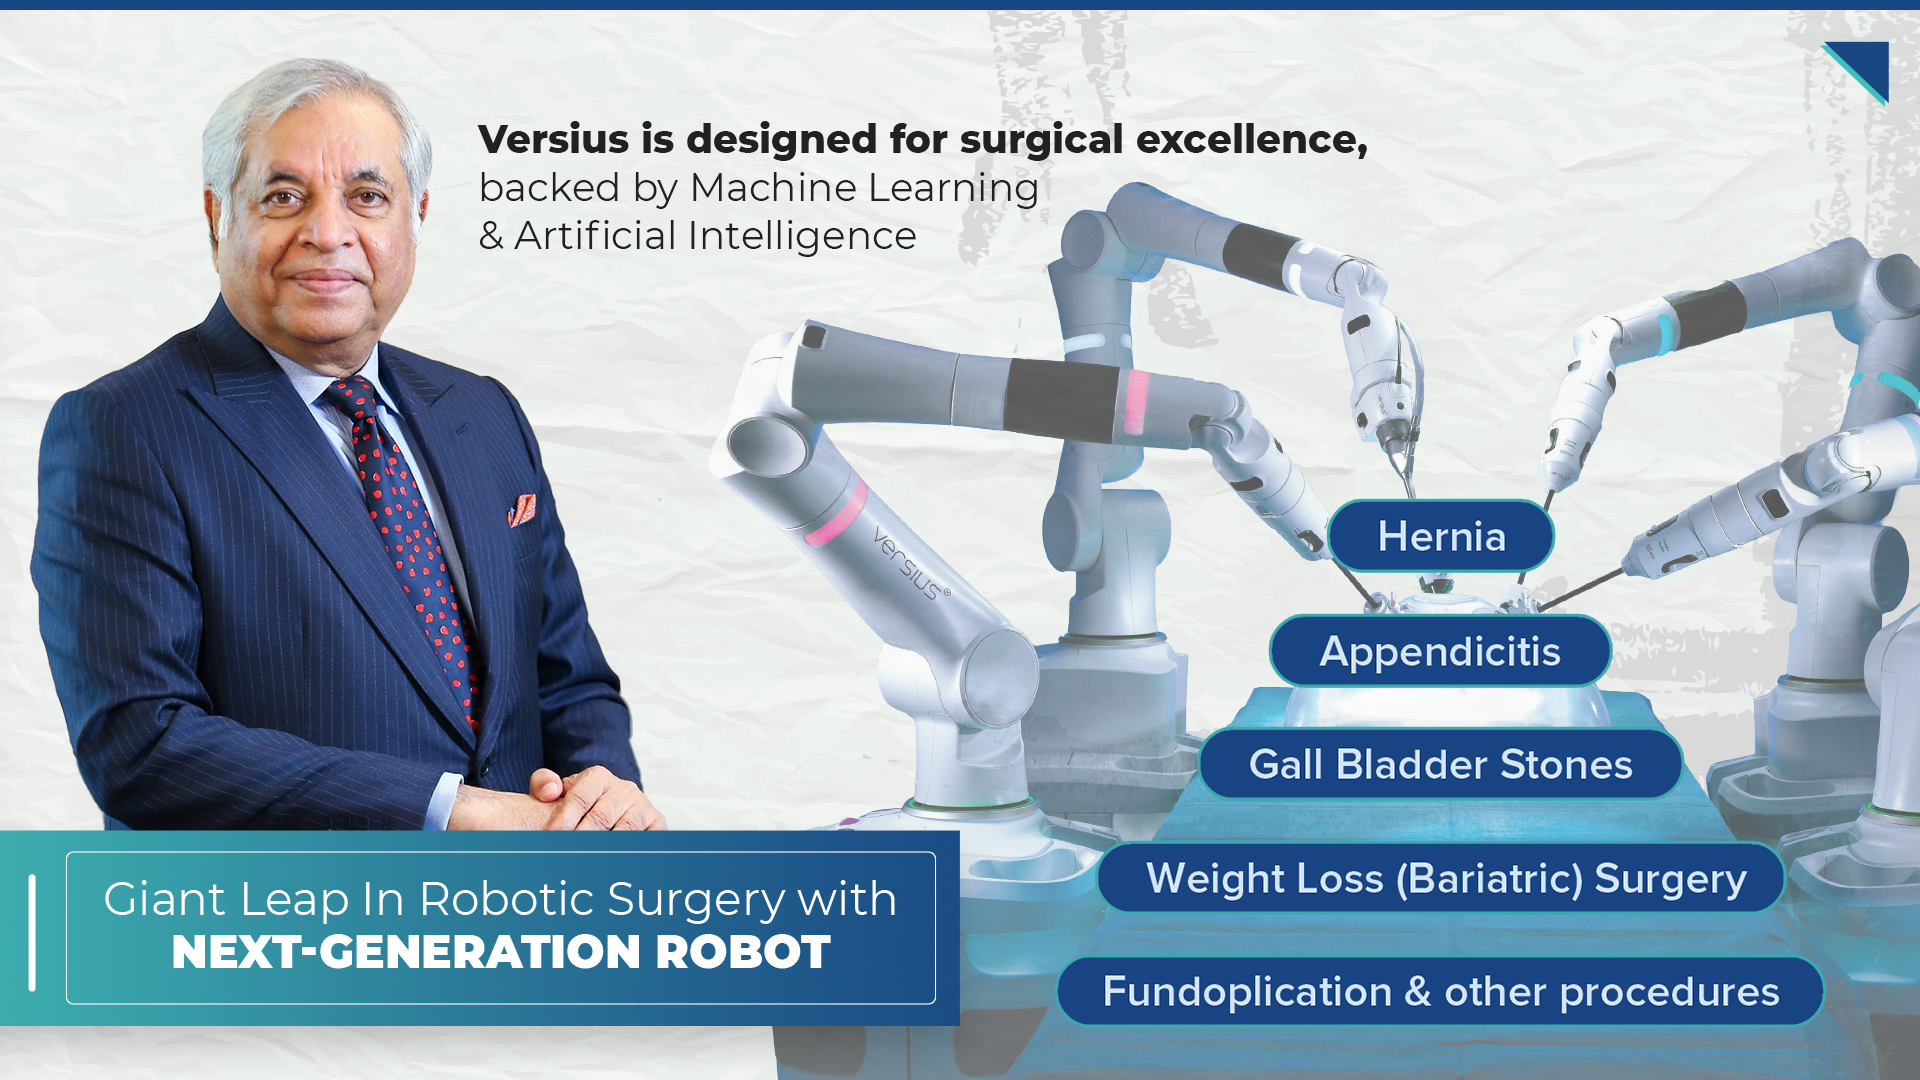 A Giant Leap with Next-Generation Robotic Surgery